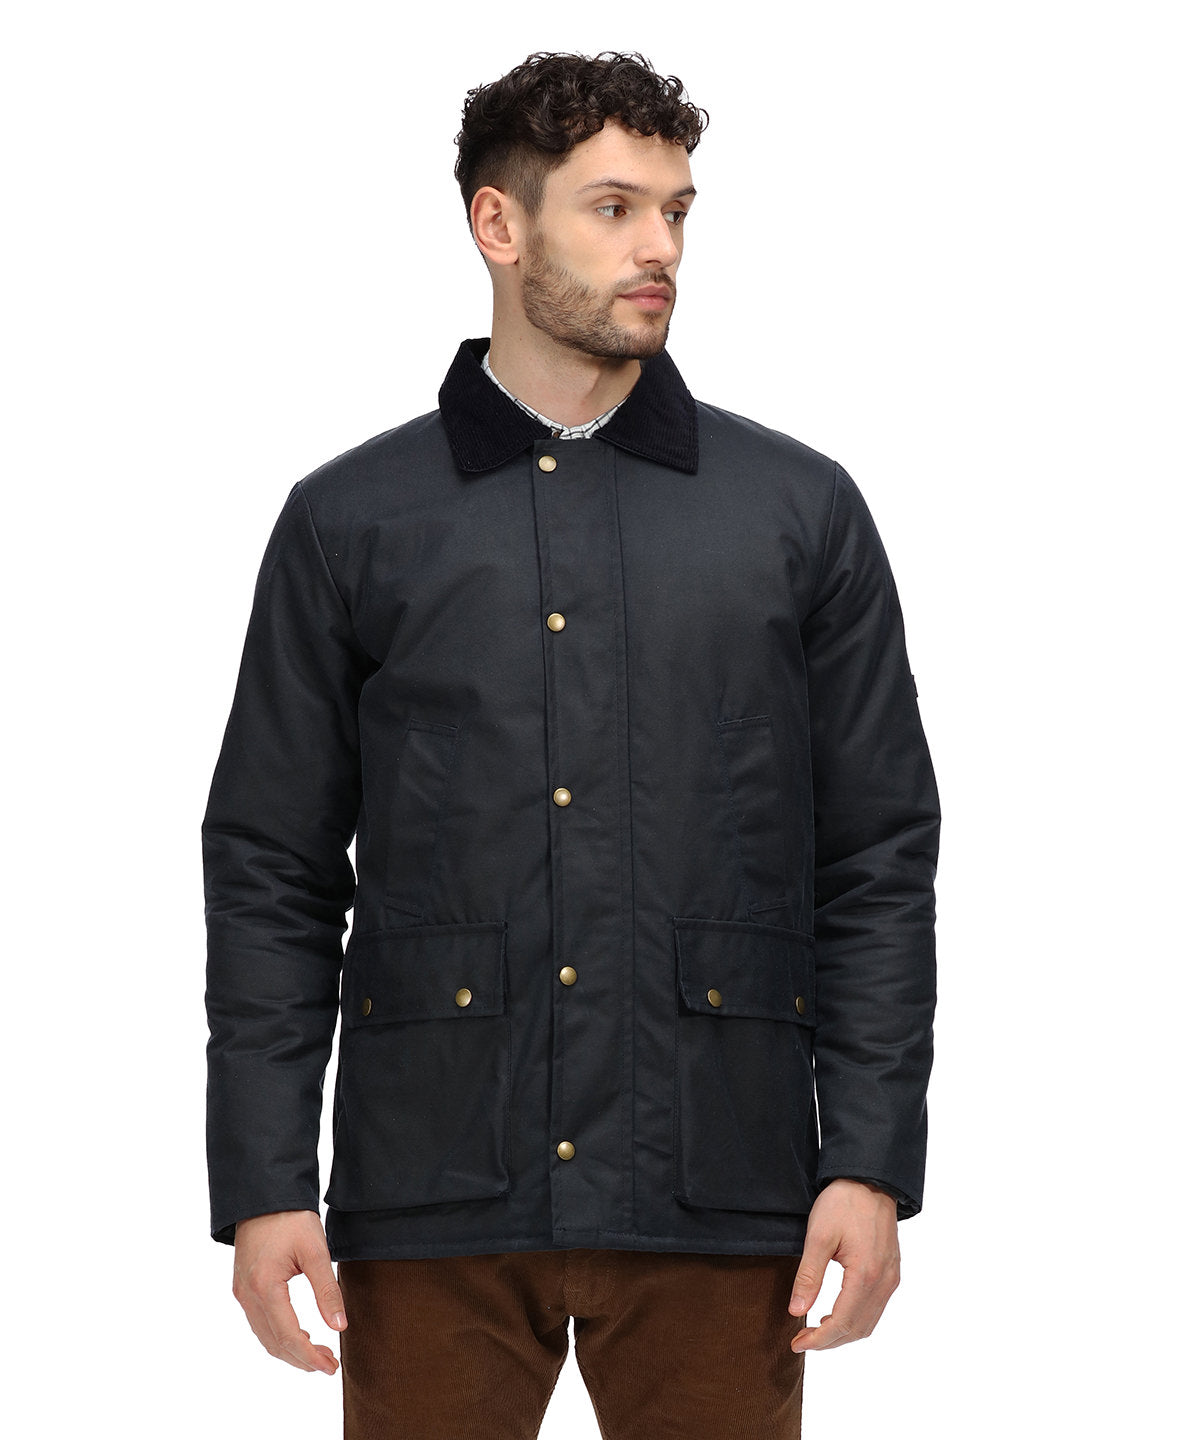 Pensford Insulated Waxed Jacket